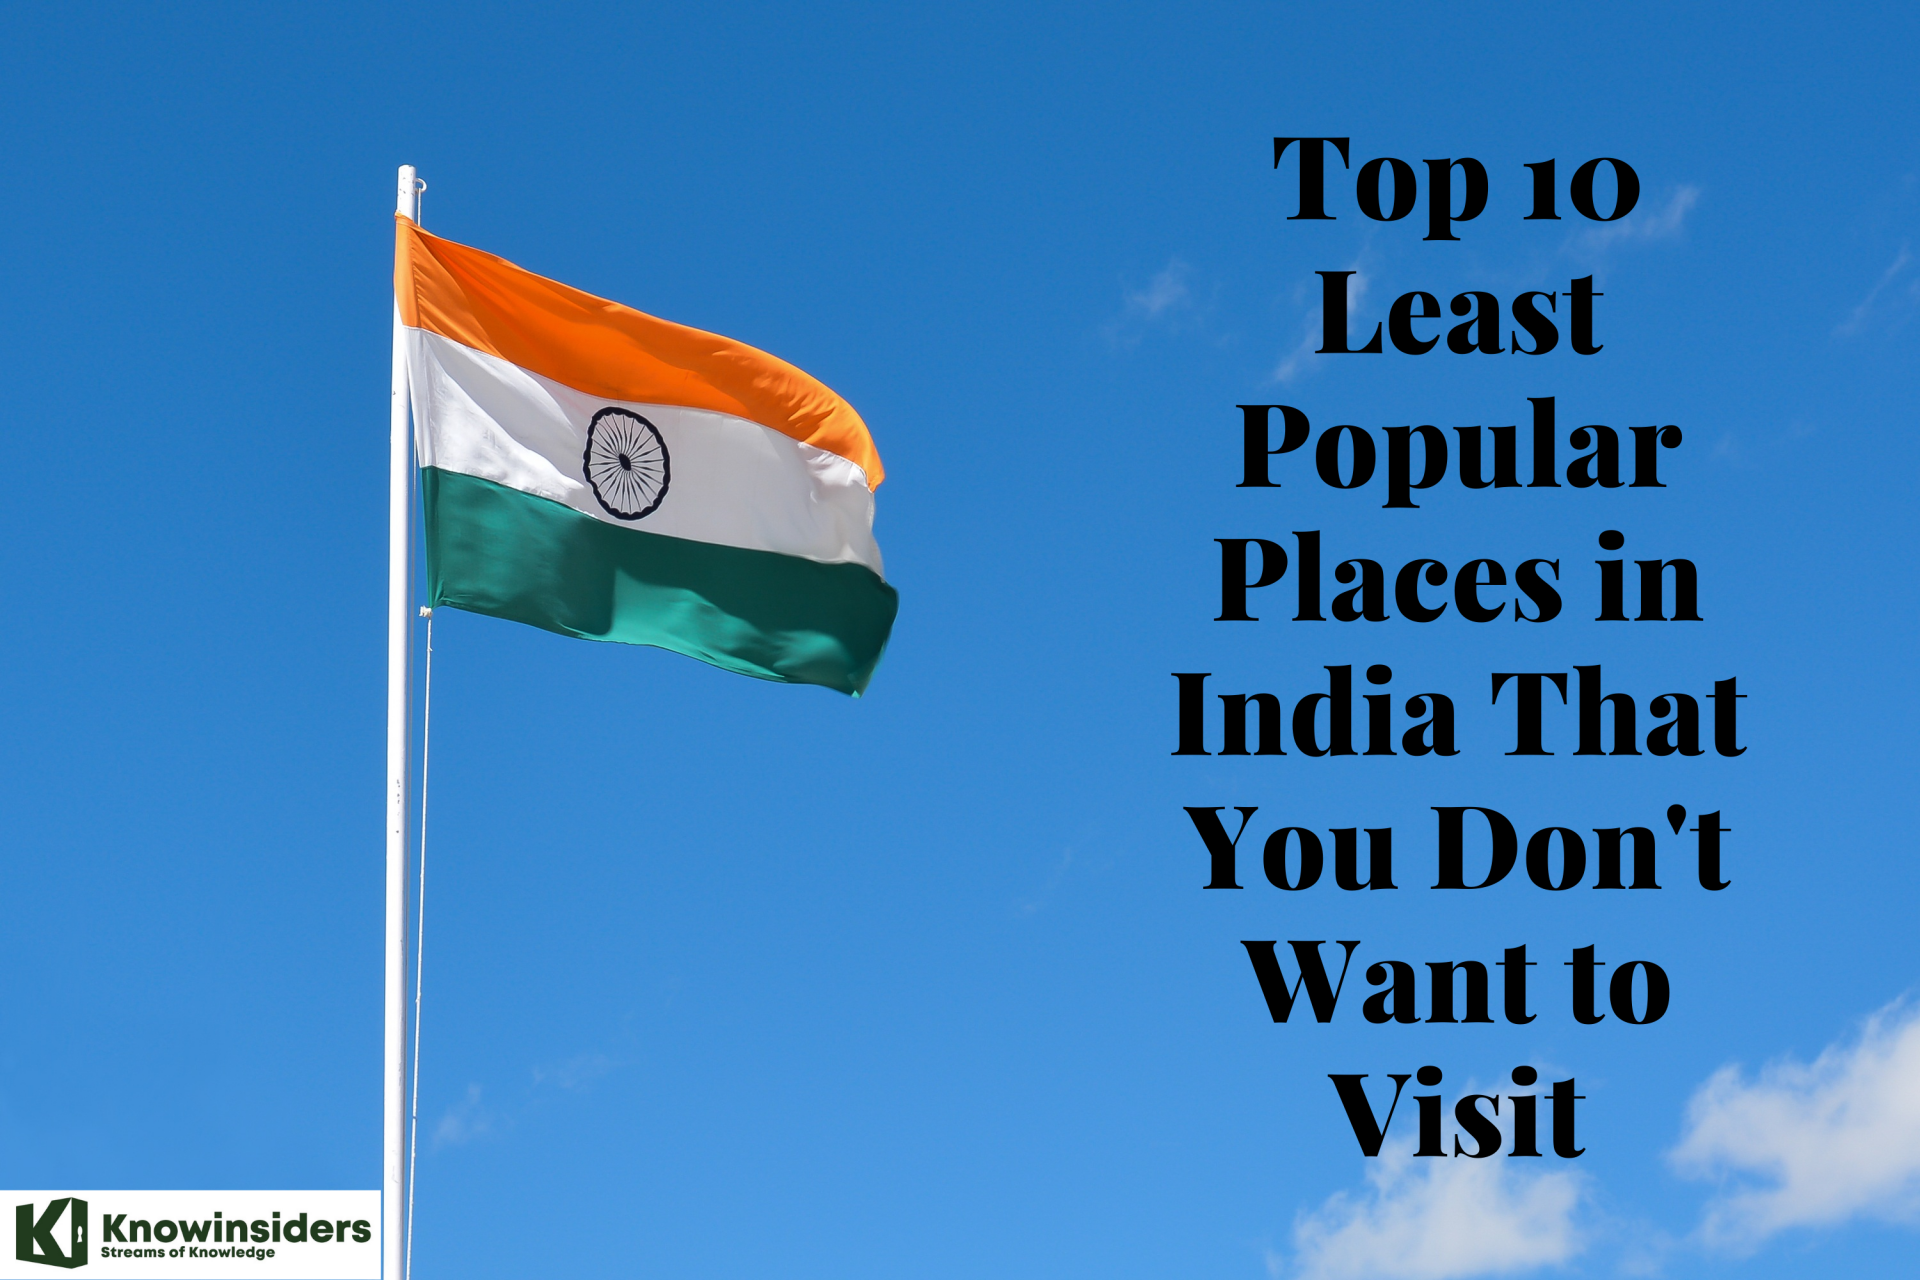 Top 10 Least Popular Places in India That You Don't Want to Visit